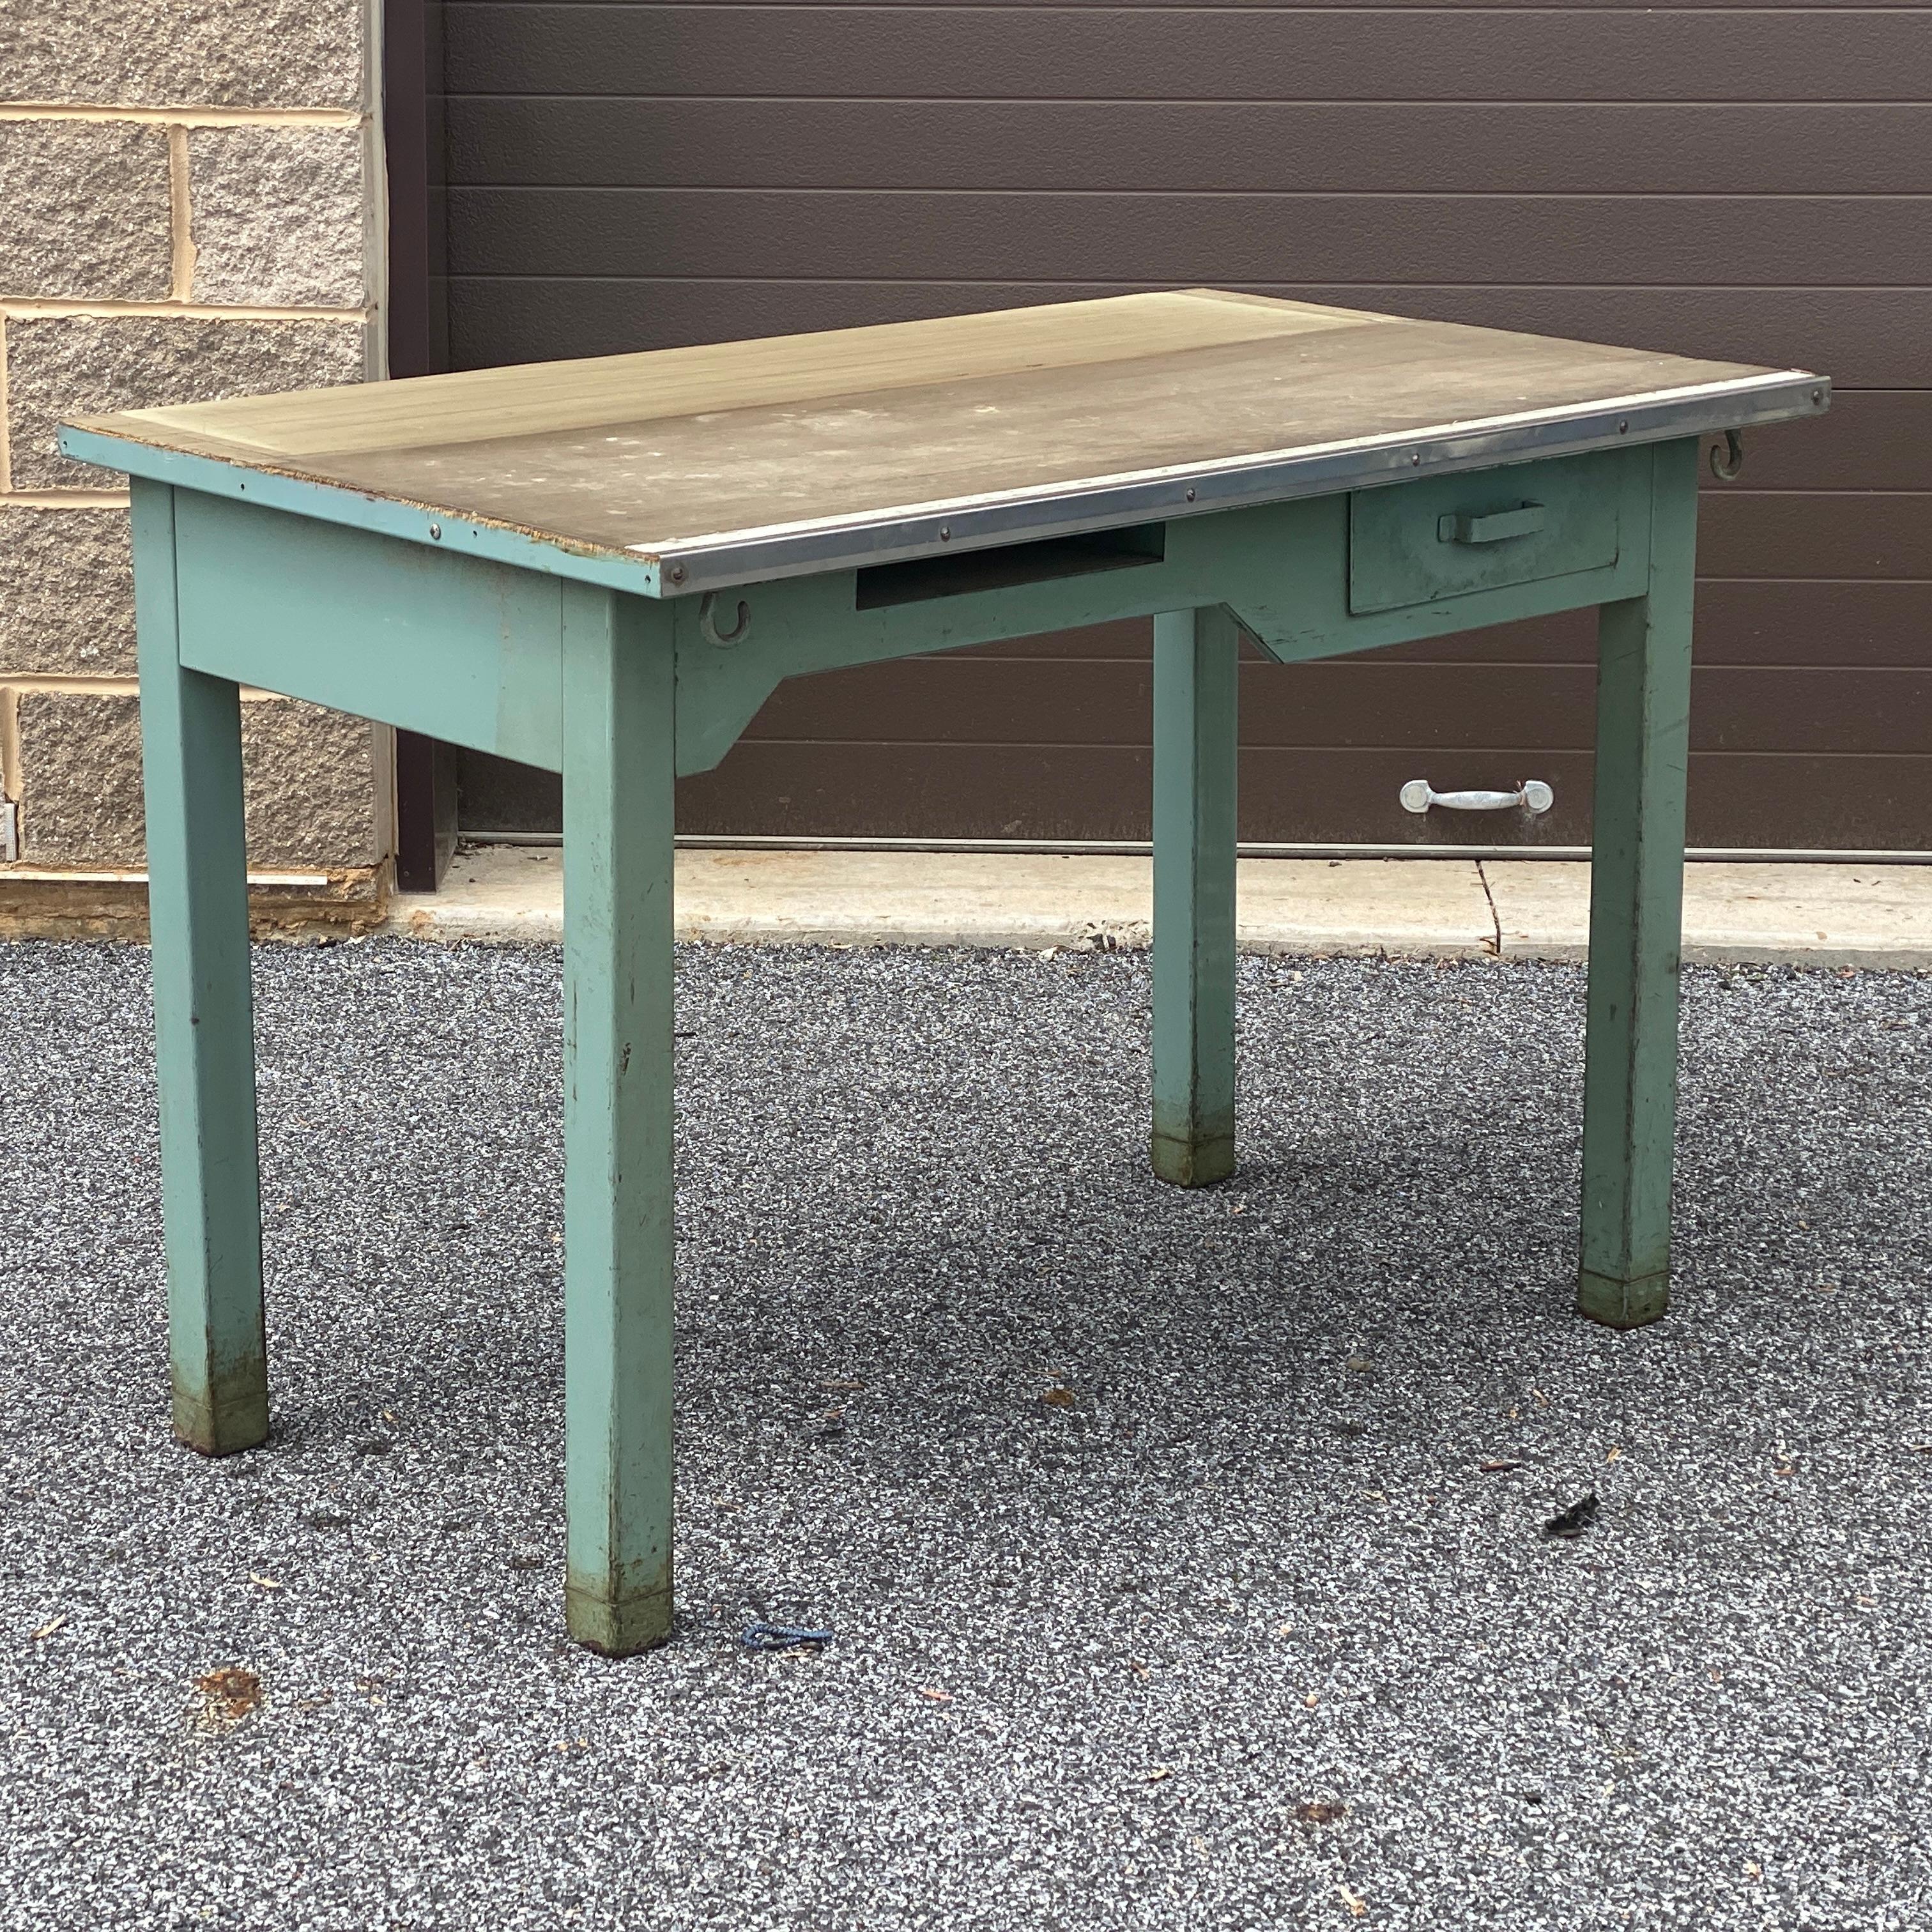 1950's Post Office Steel Industrial Mail Sorting Desk Workstation Table For Sale 2